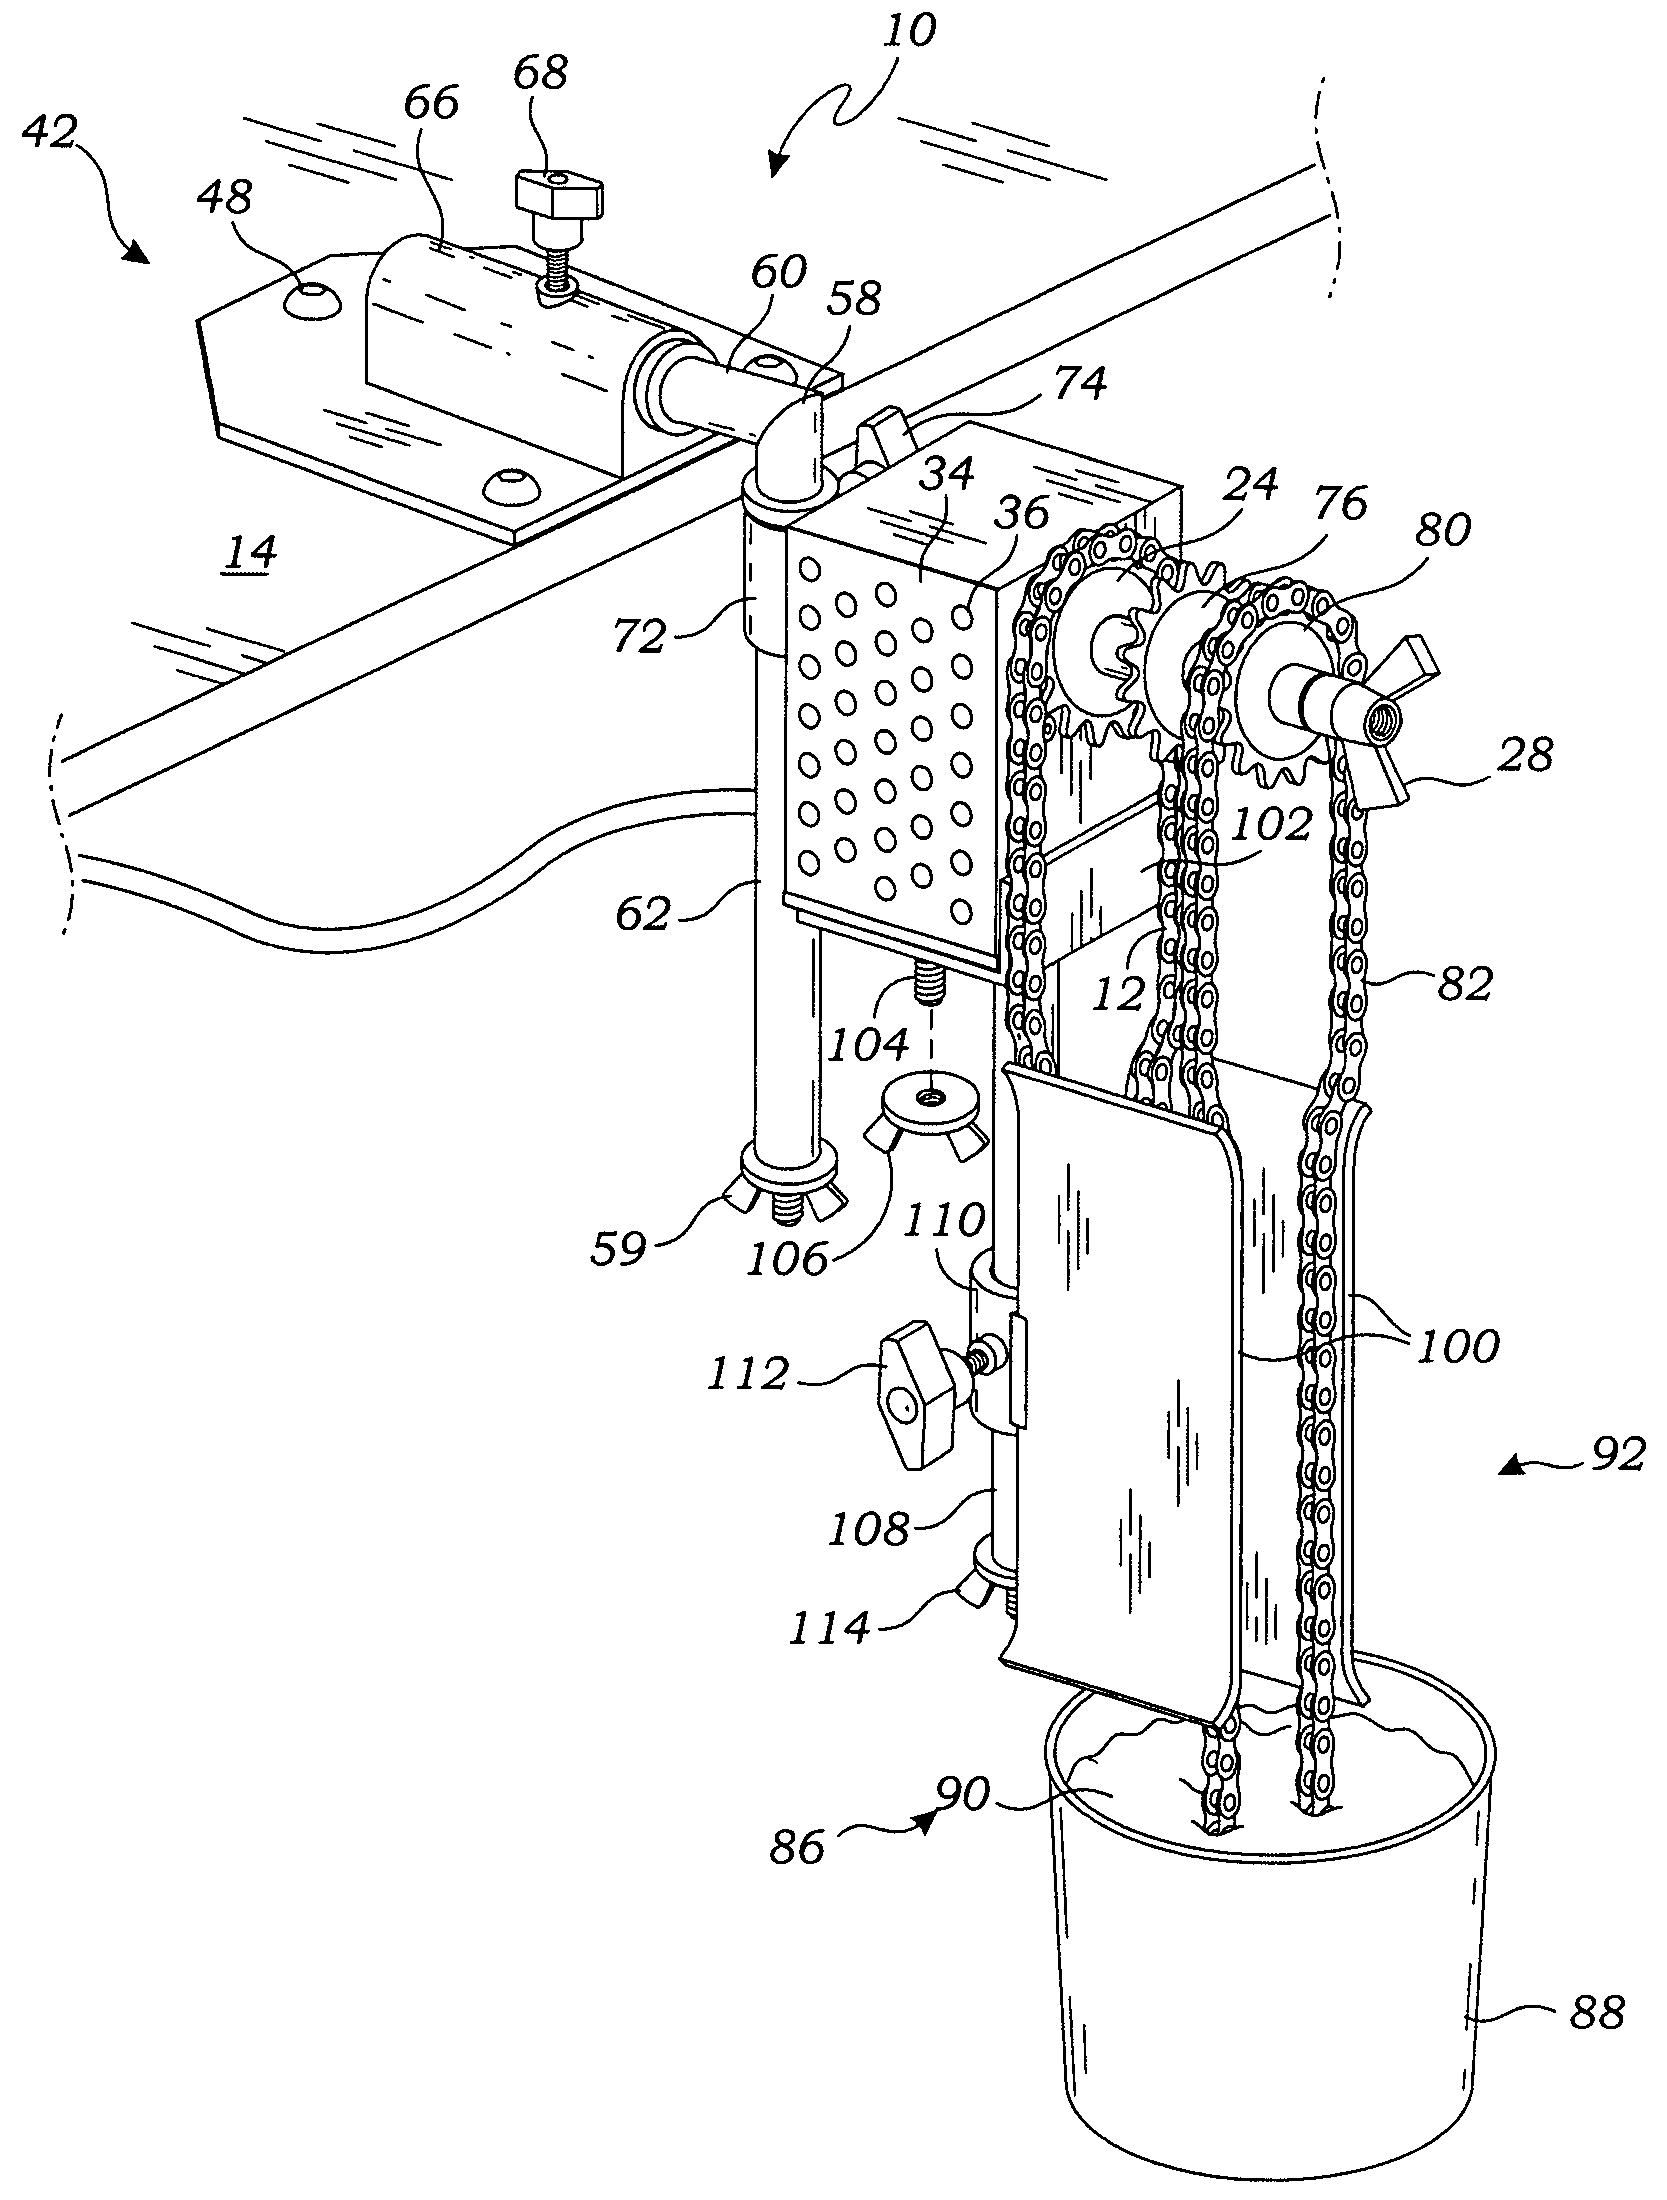 Drive chain cleaning device